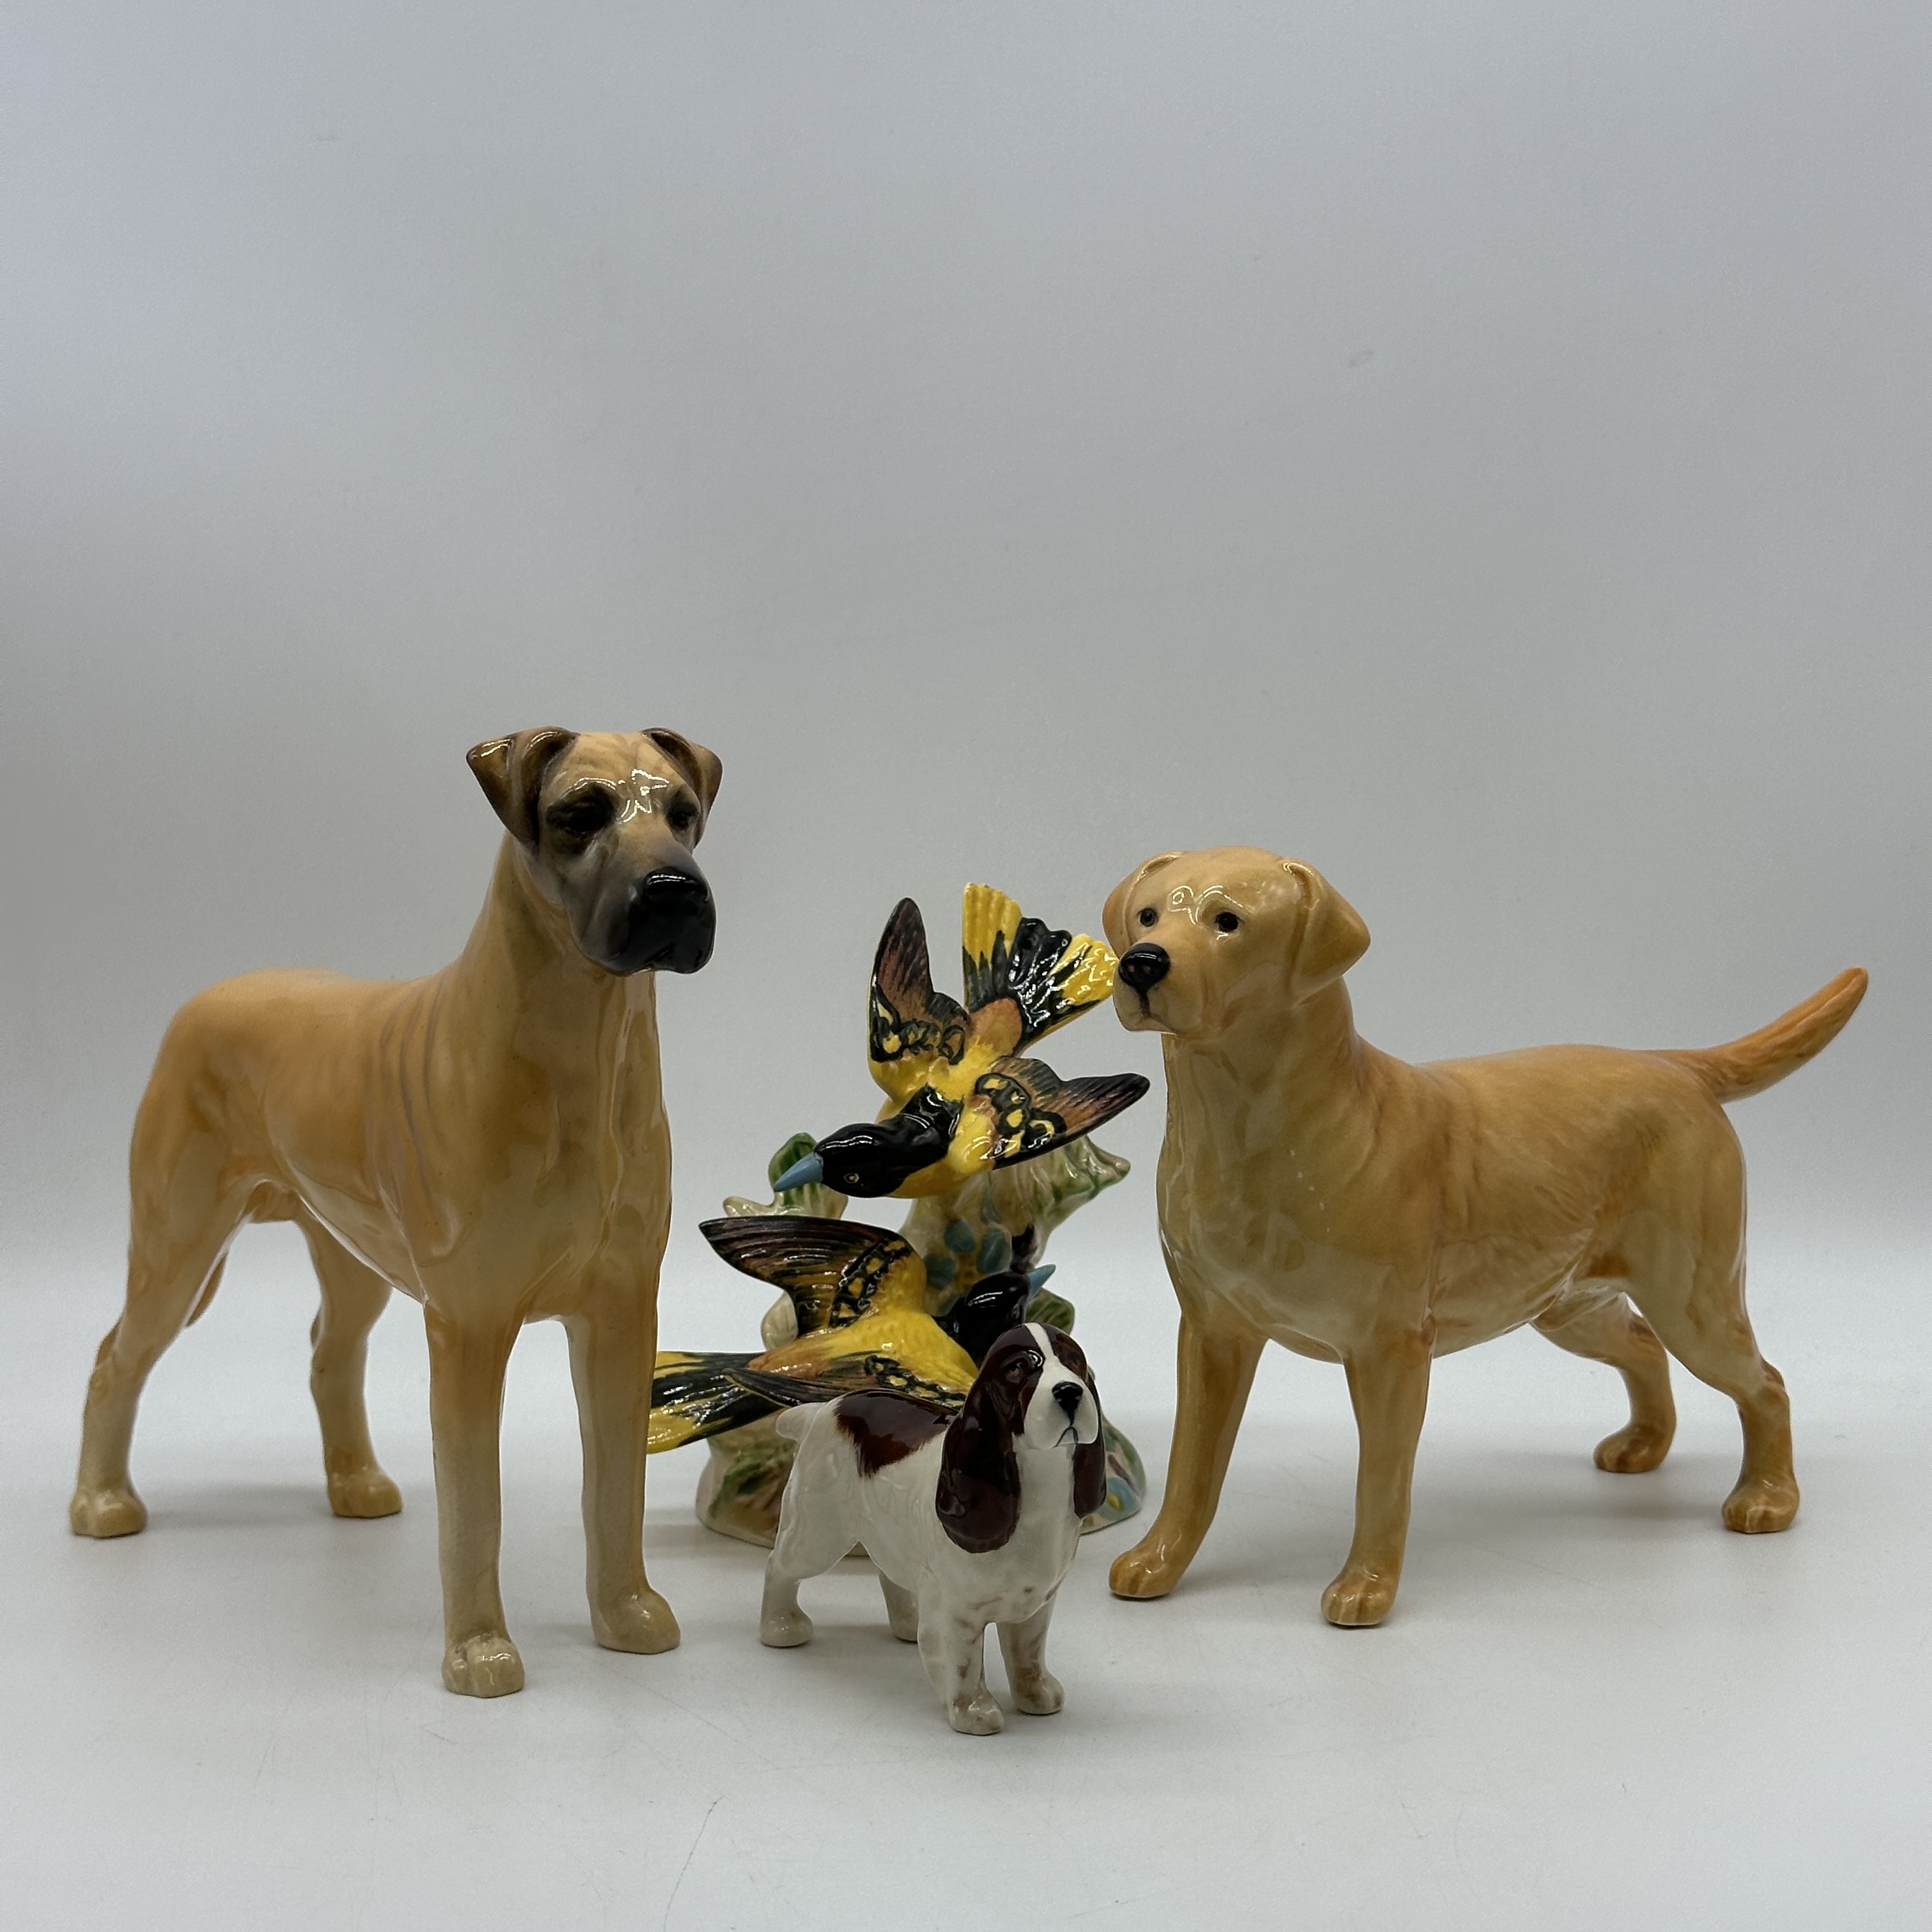 A Beswick group of model figures